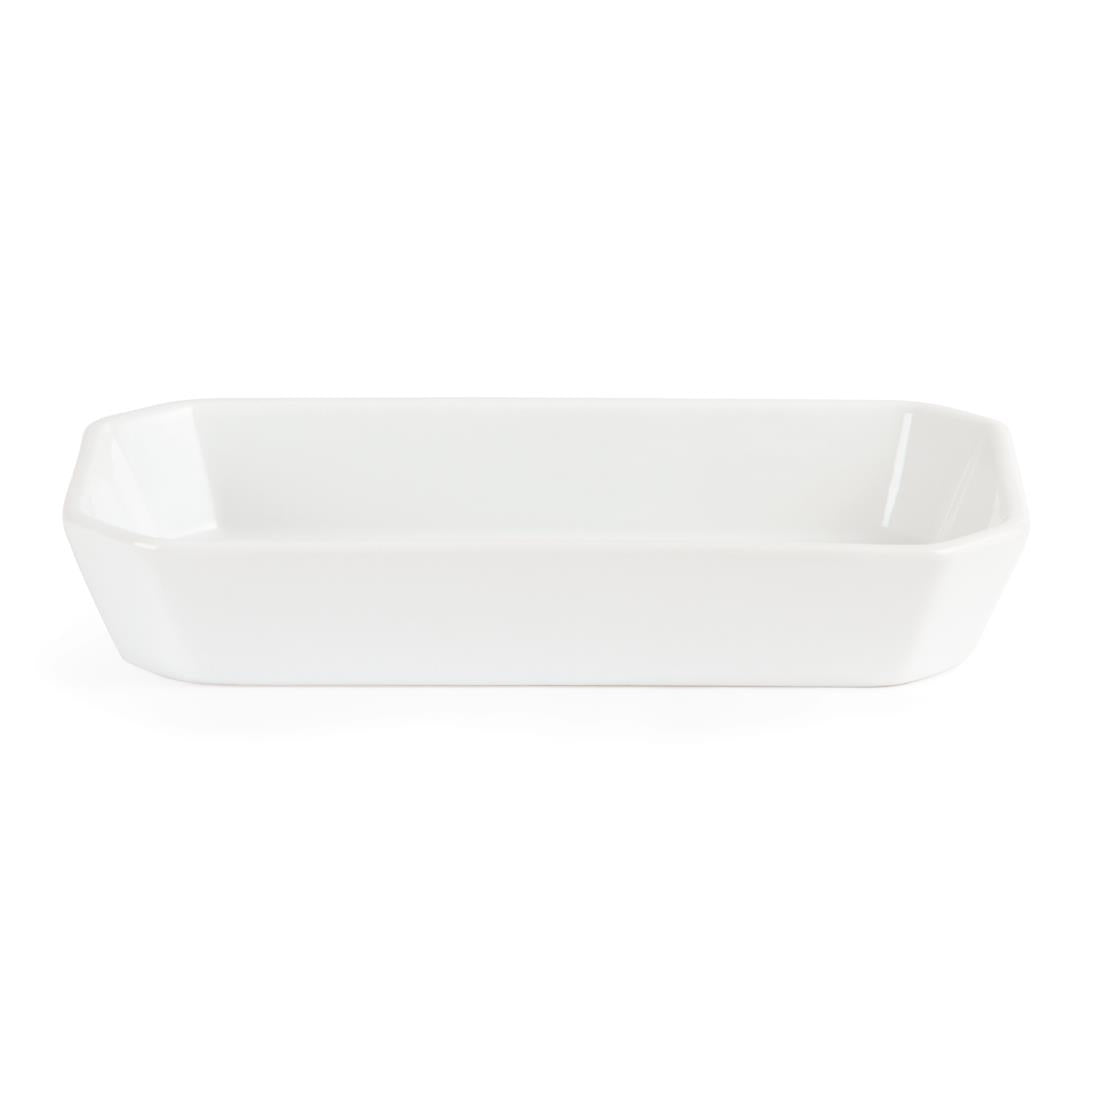 W438 Olympia Whiteware Oblong Hors d'Oeuvre Dishes 235x 122mm (Pack of 6)